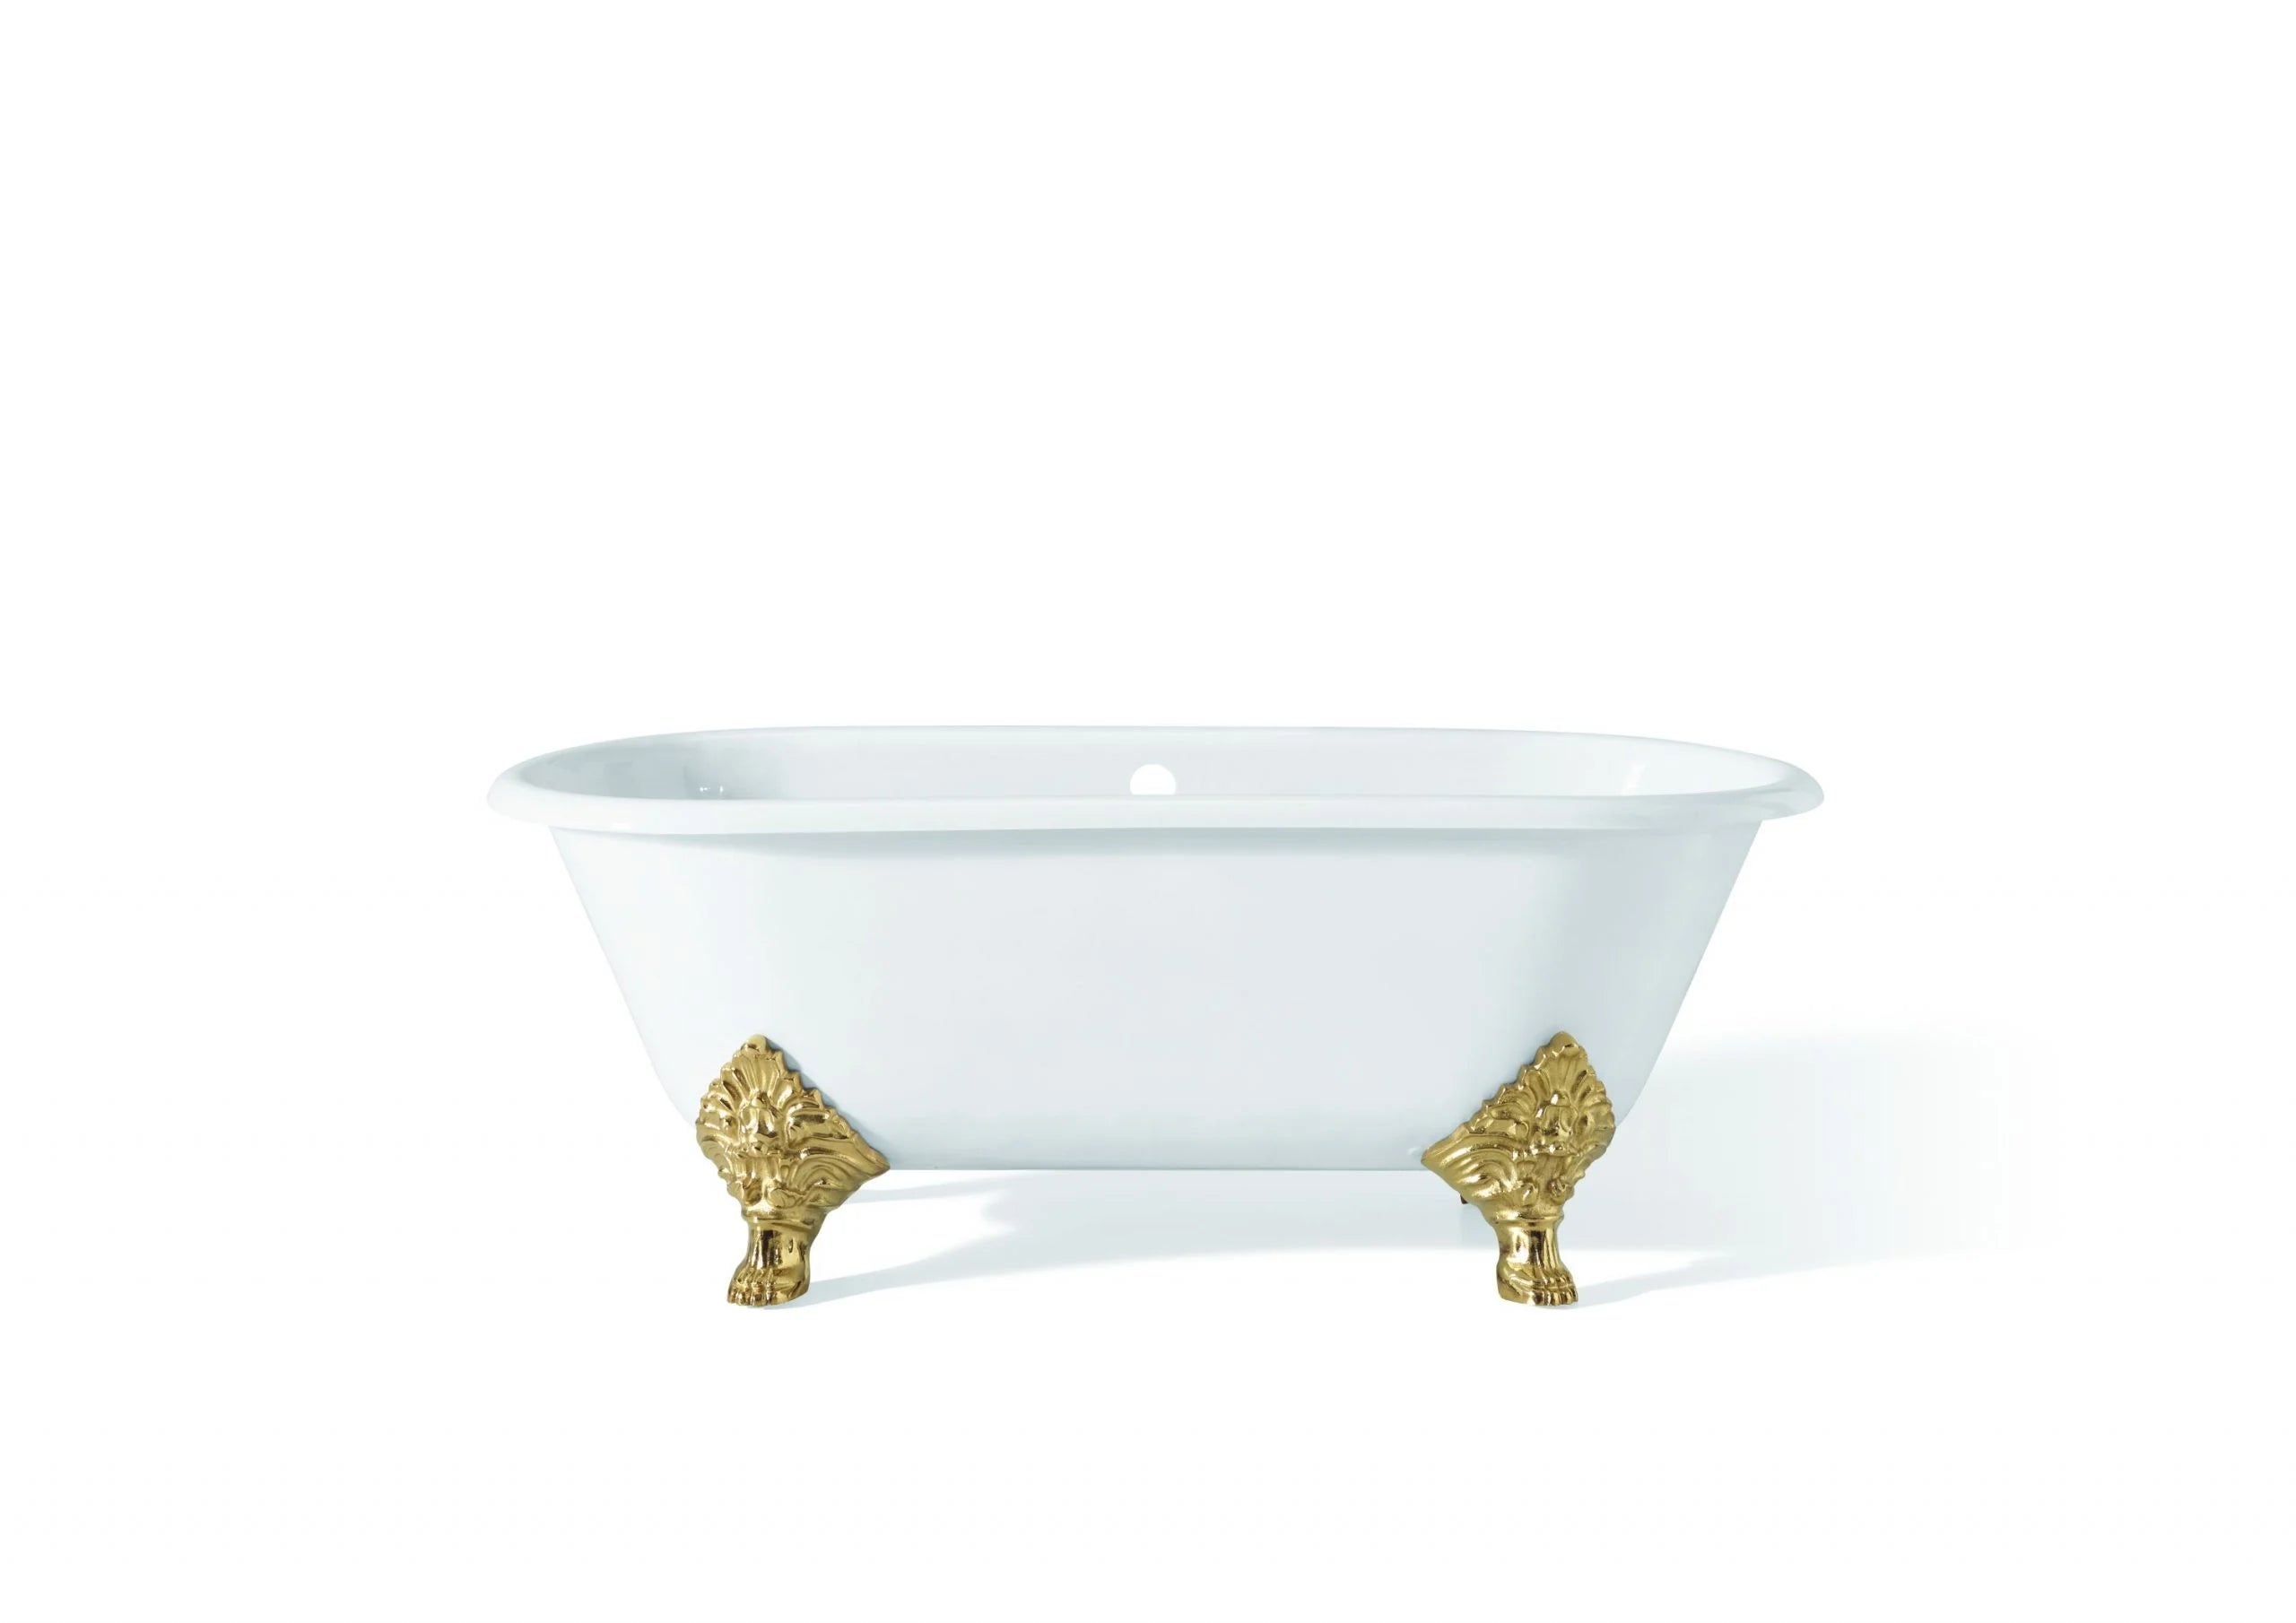 CARLTON Cast Iron Bathtub with Continuous Rolled Rim